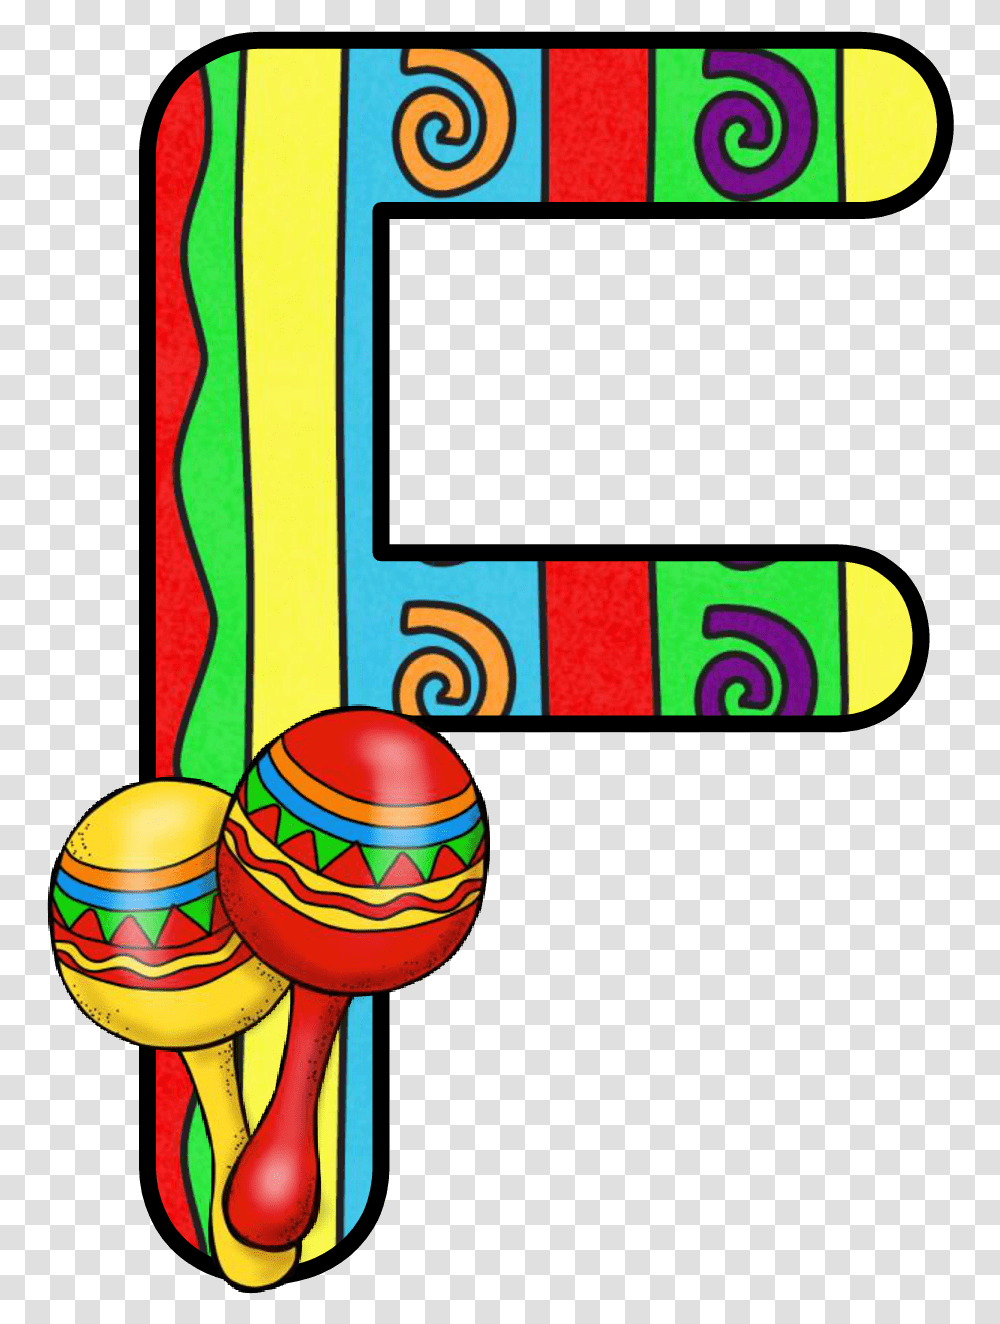 Ch B Alfabeto May 5 Th De Kid Sparkz Fiesta Clipart Letters, Food, Egg, Musical Instrument Transparent Png